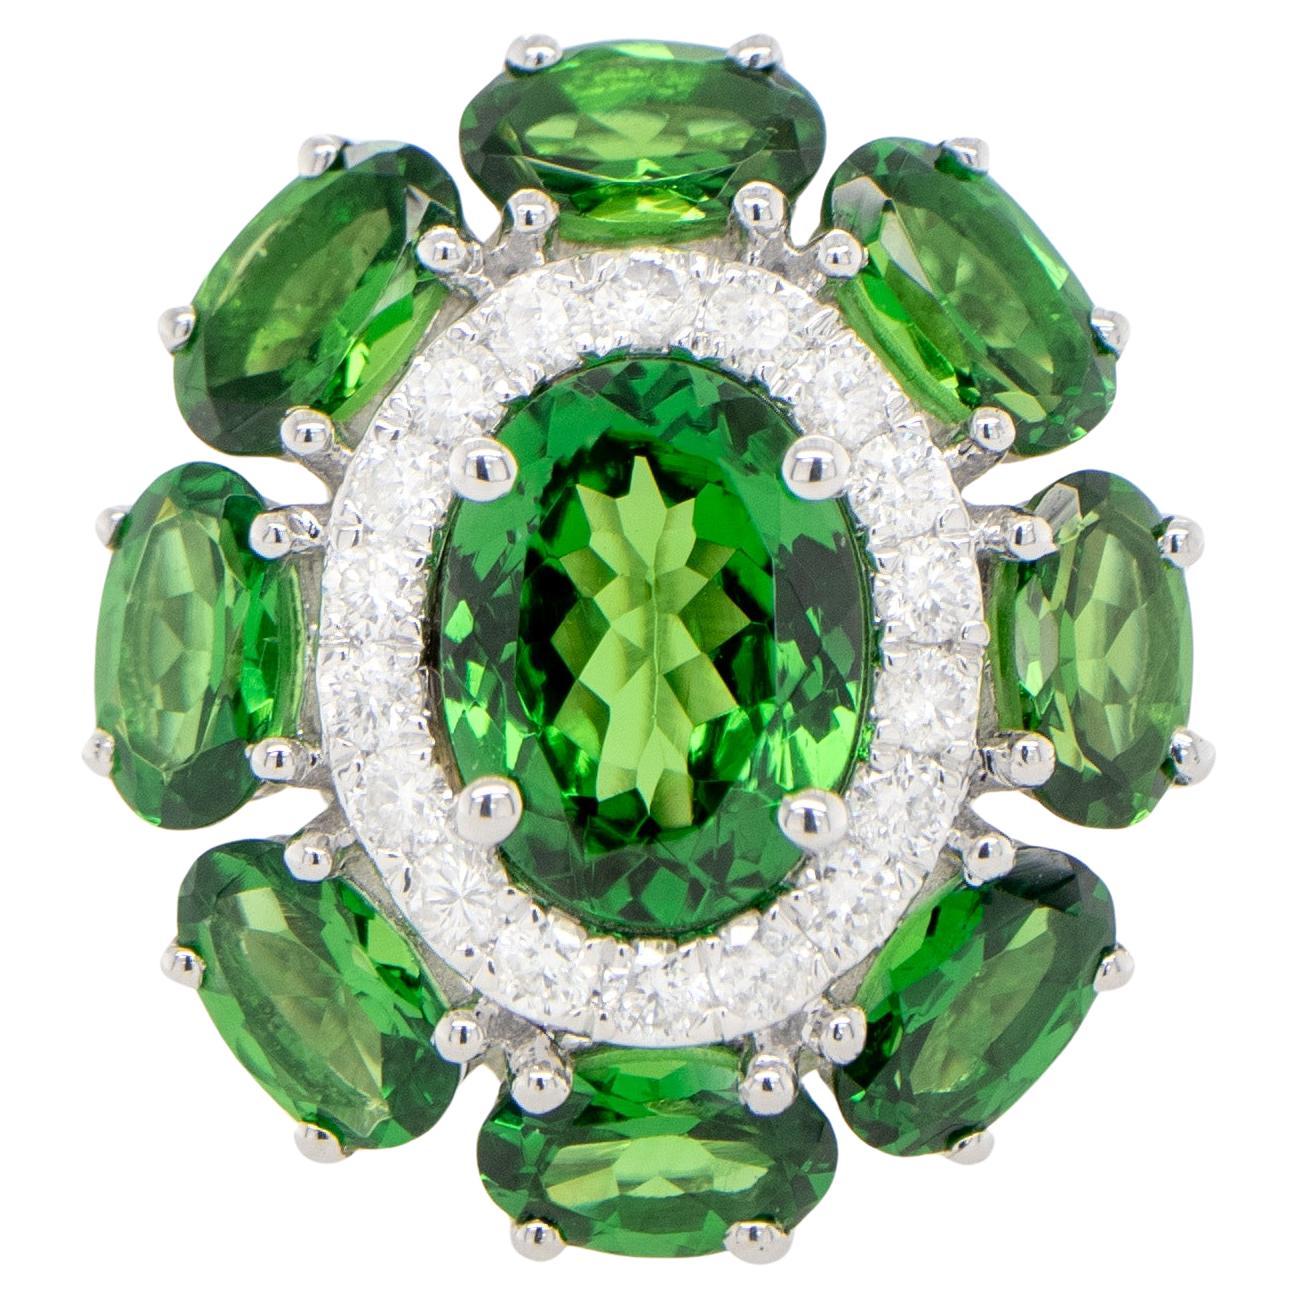 Tsavorite Cocktail Ring With Diamonds 3.56 Carats 18K White Gold